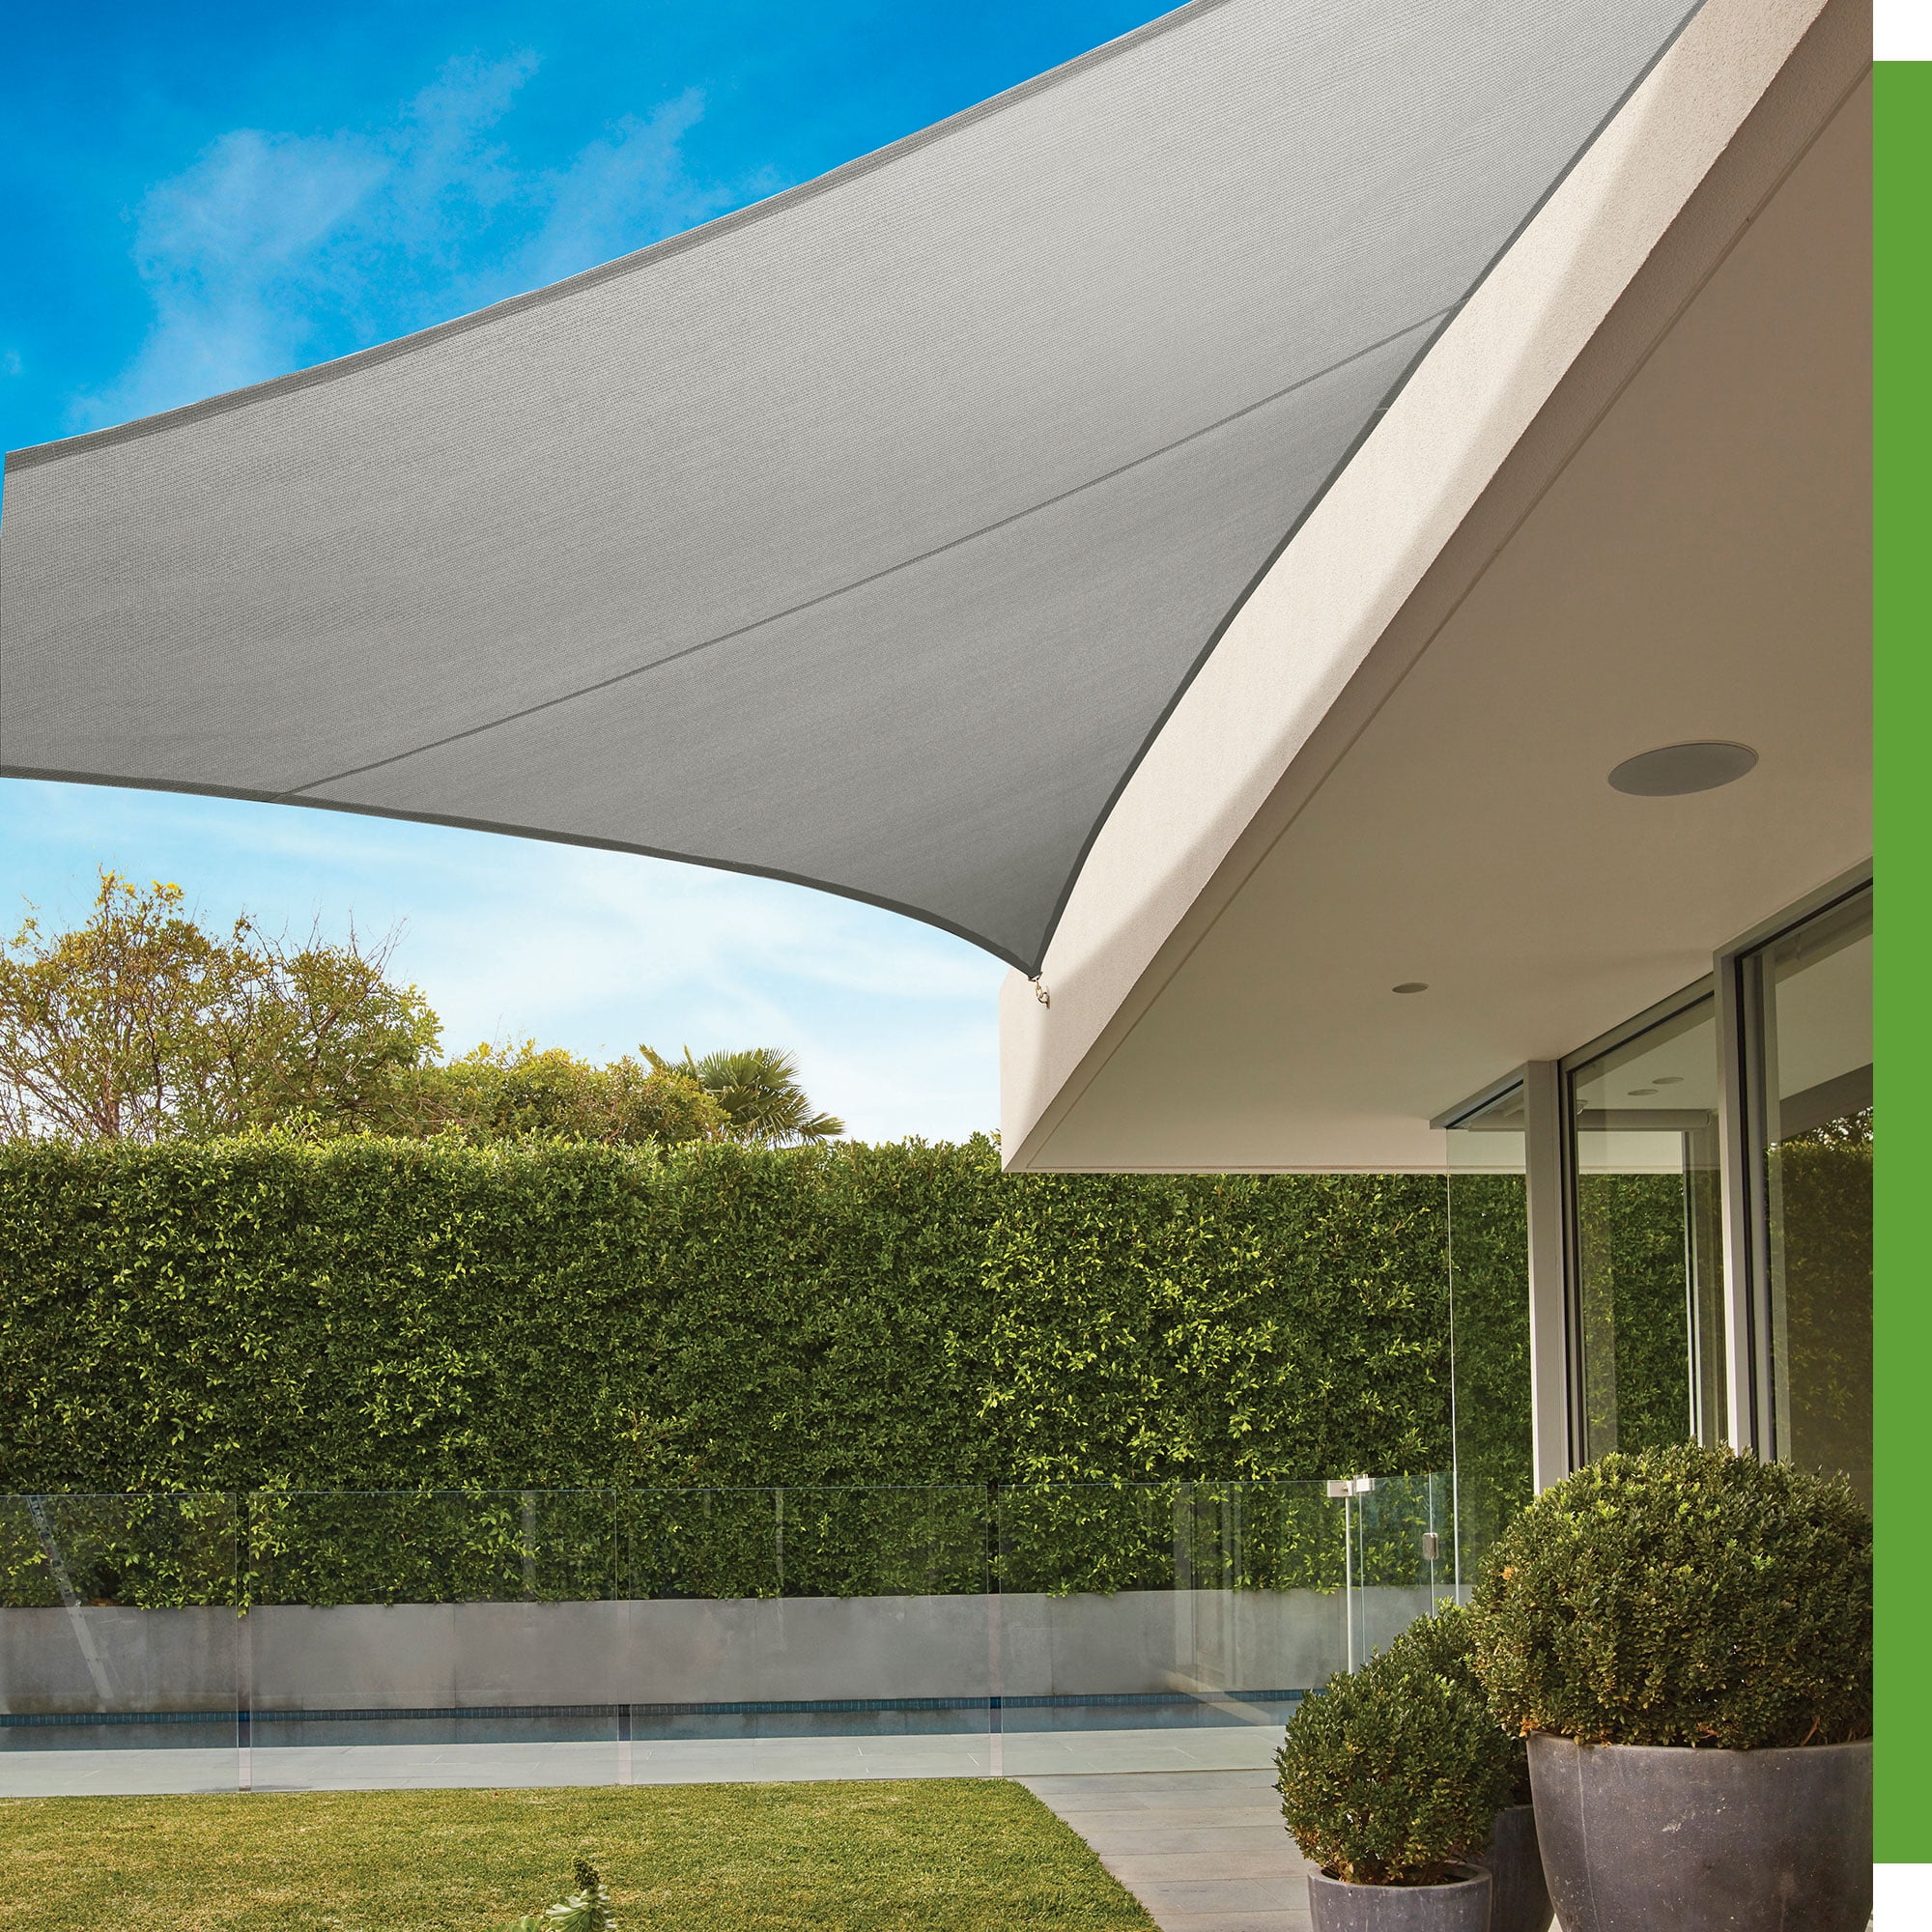 Details about   Sun Shade Sail Patio Outdoor Canopy Pool UV Block Protect Cover Triangle Square. 